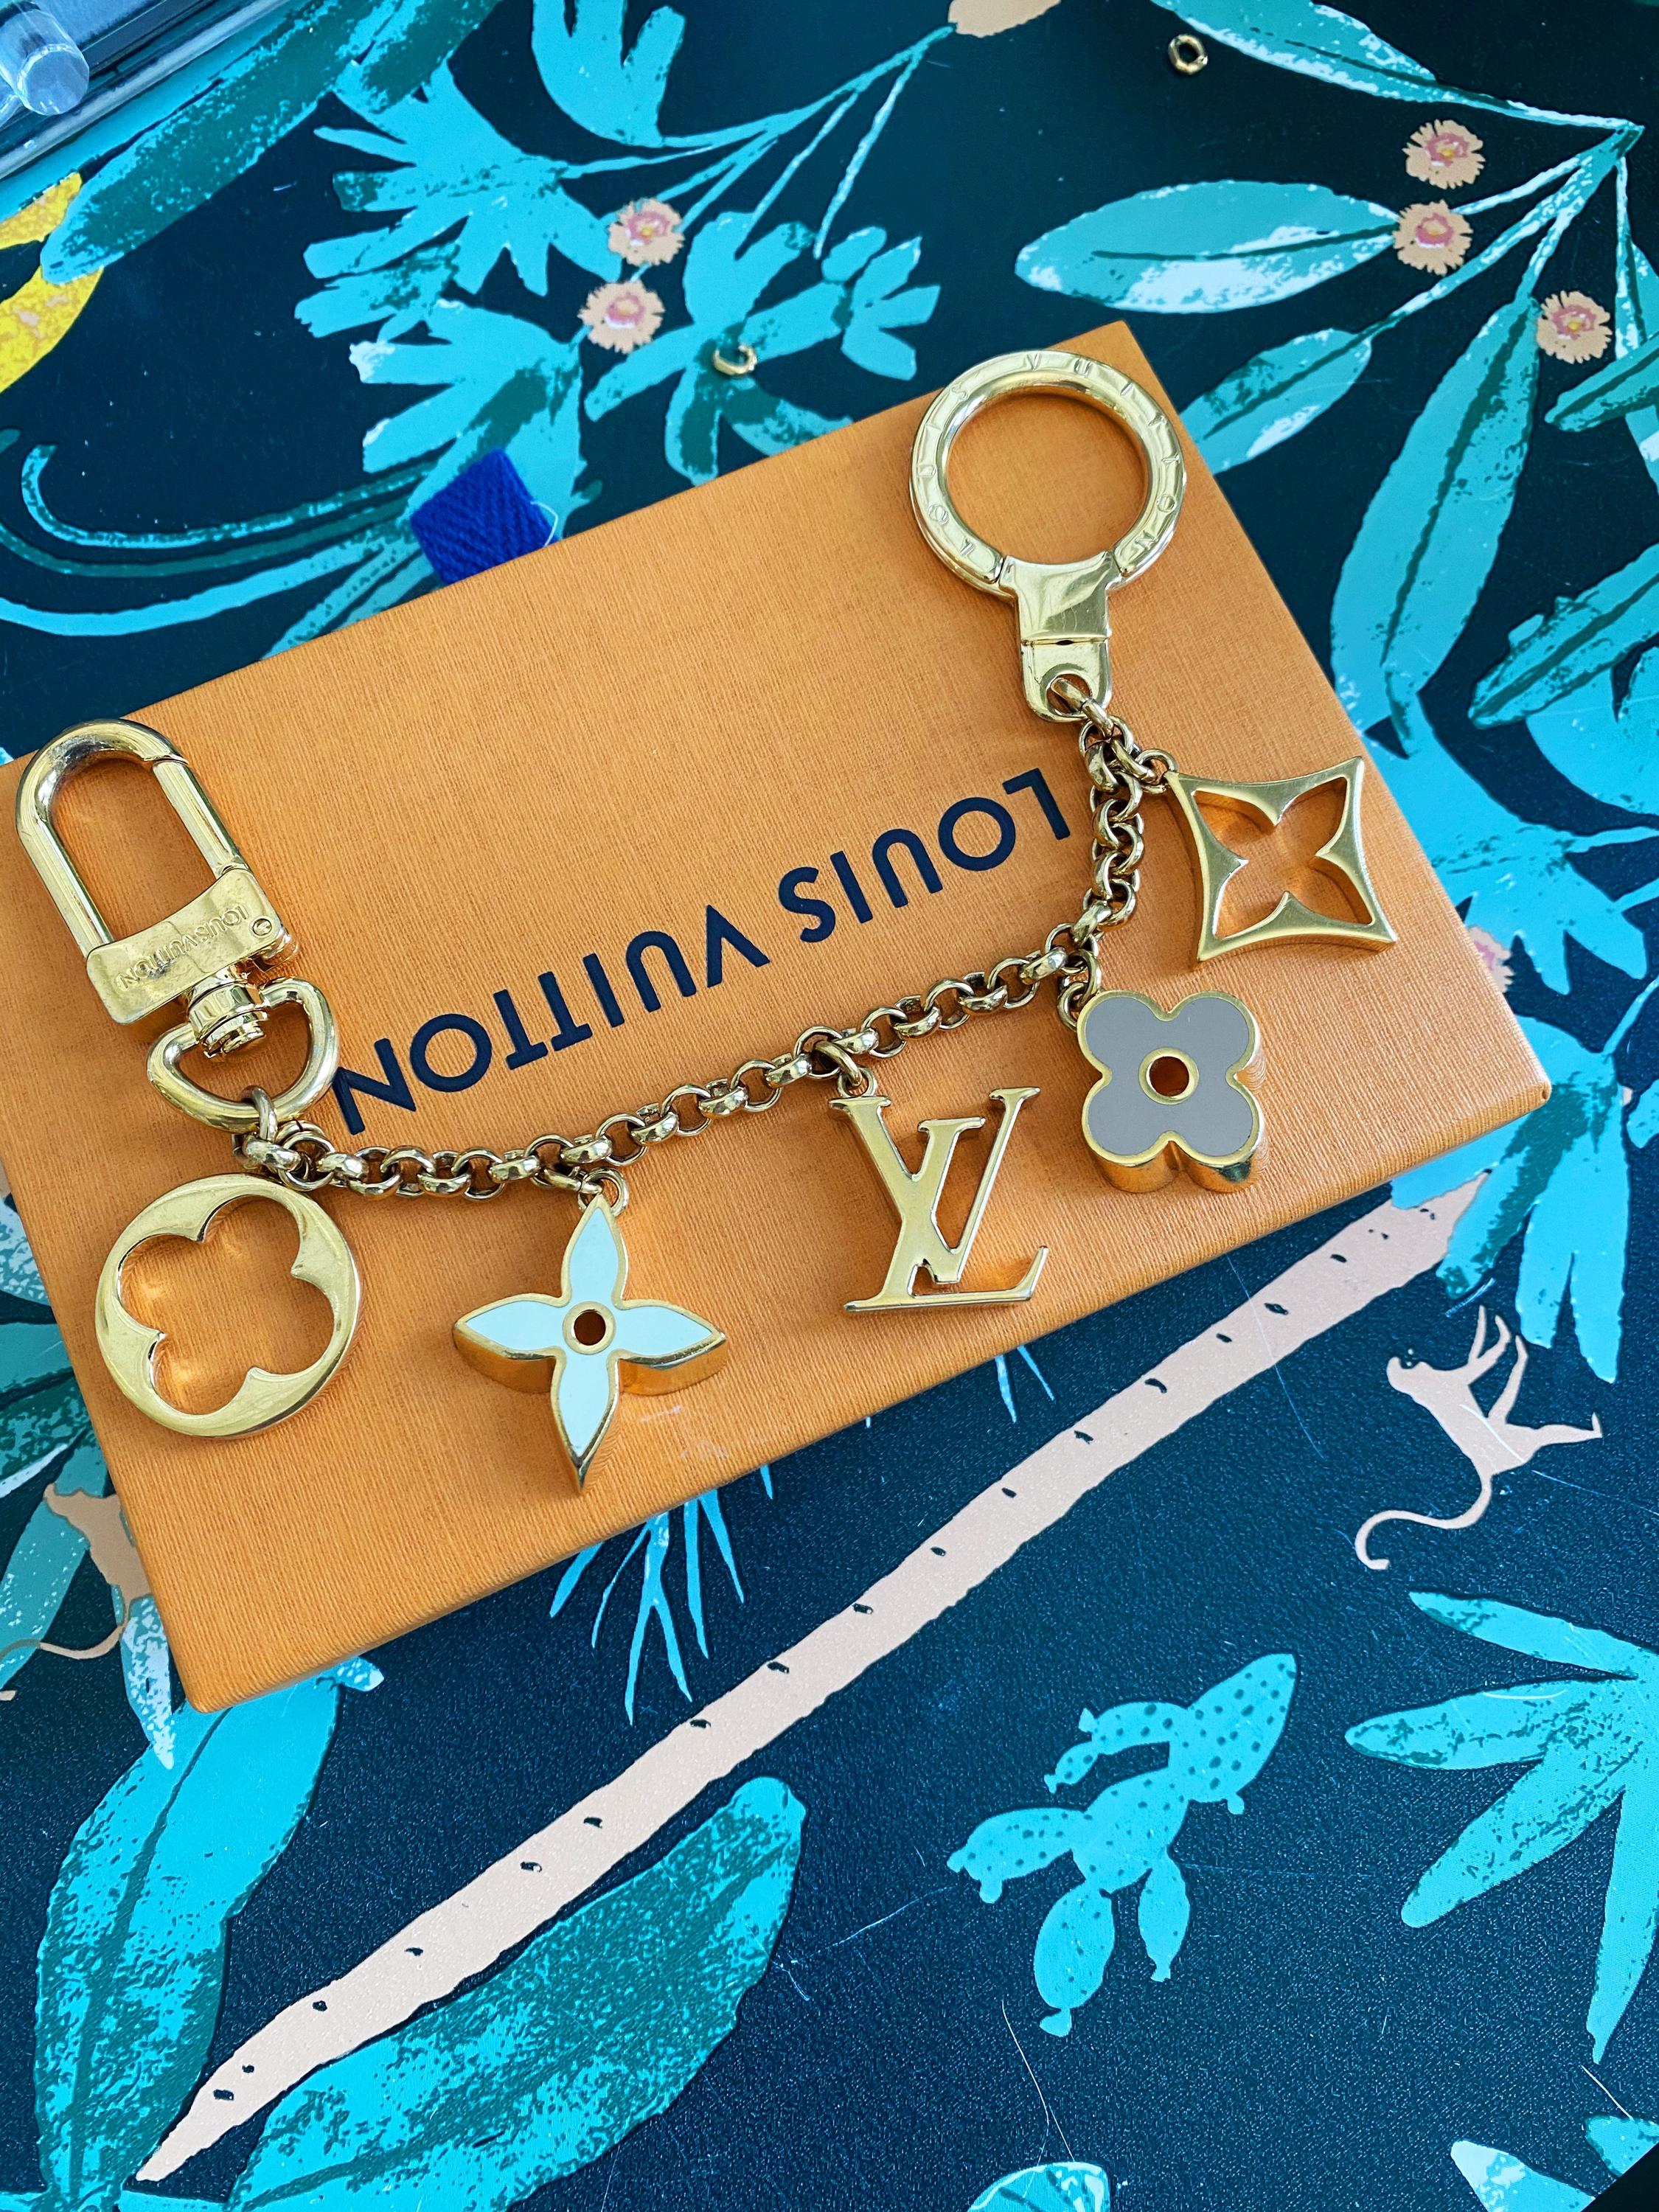 Louis Vuitton LV Signature Pearl Keyring and Bag Charm